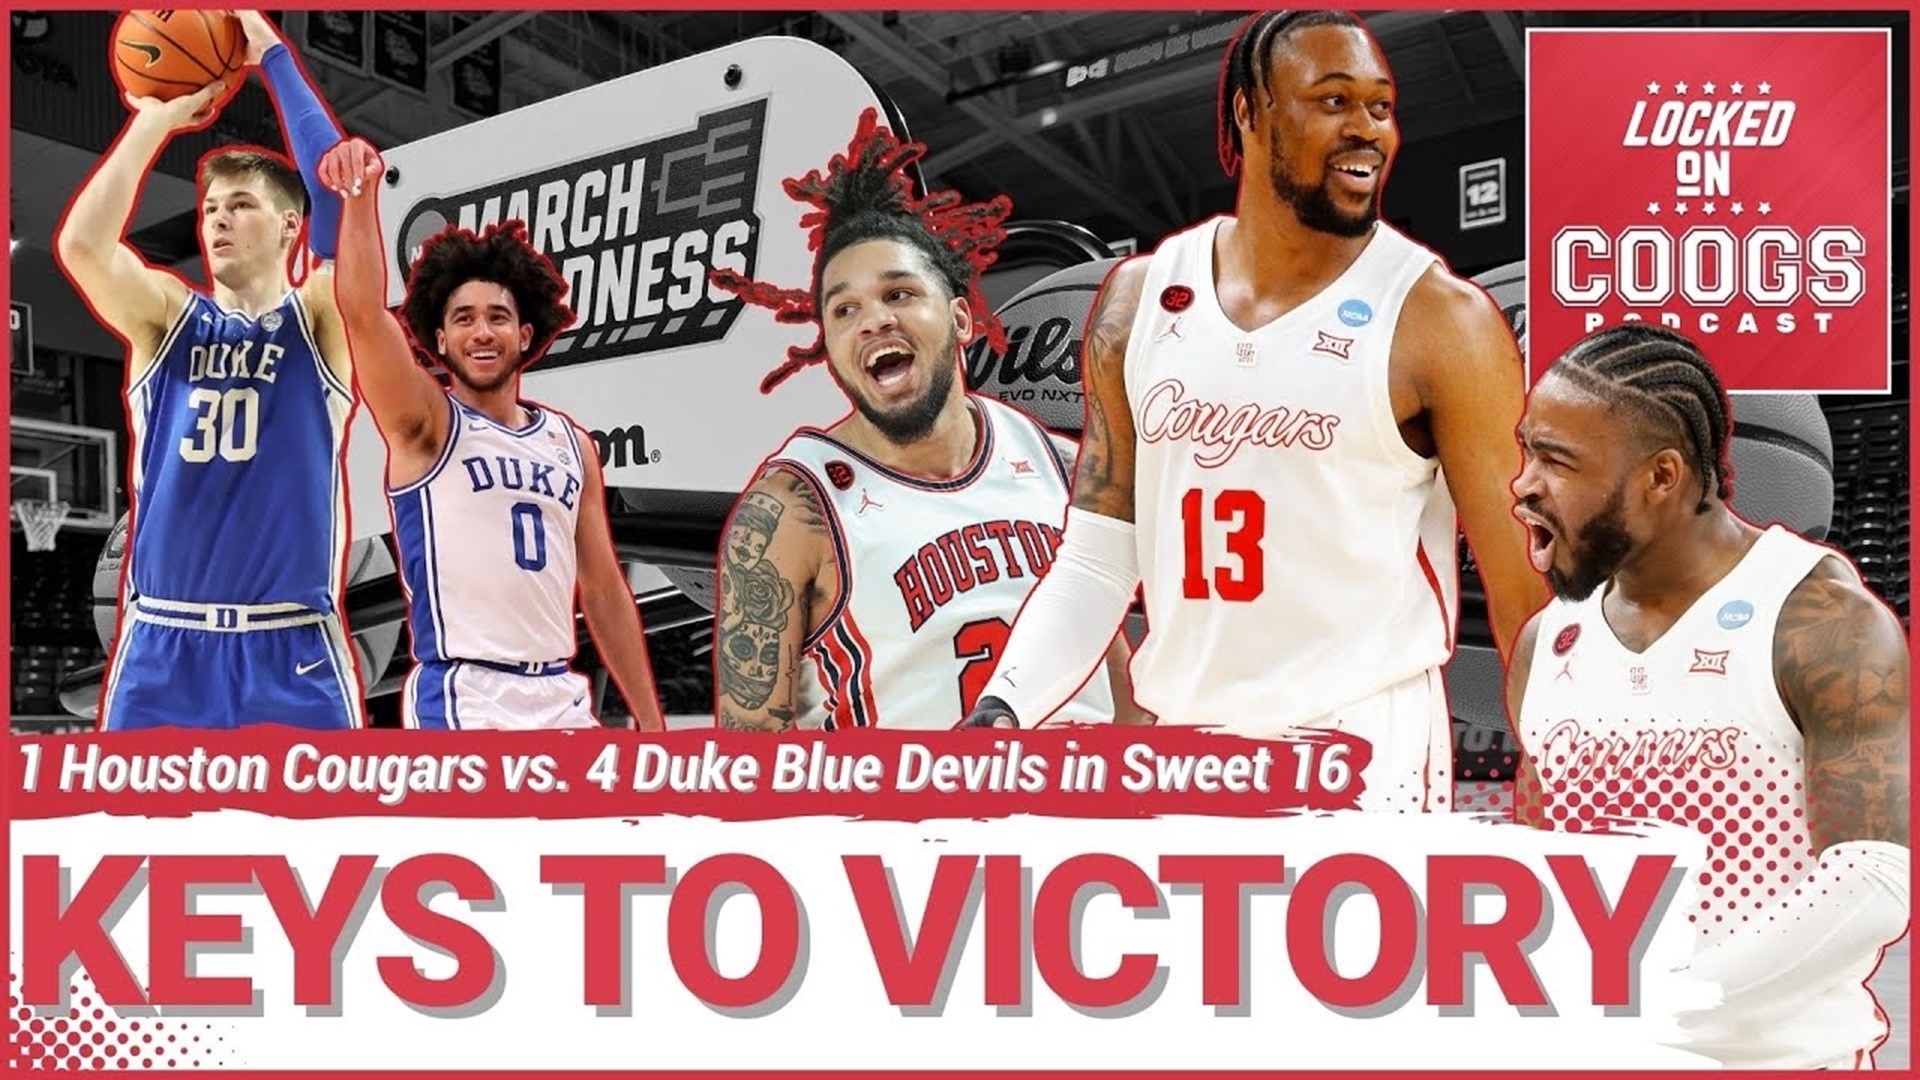 Coogs' House! The day is finally here! The 1 Houston Cougars face the 4 Duke Blue Devils in the Sweet 16 Friday Night at the American Airlines Center in Dallas.